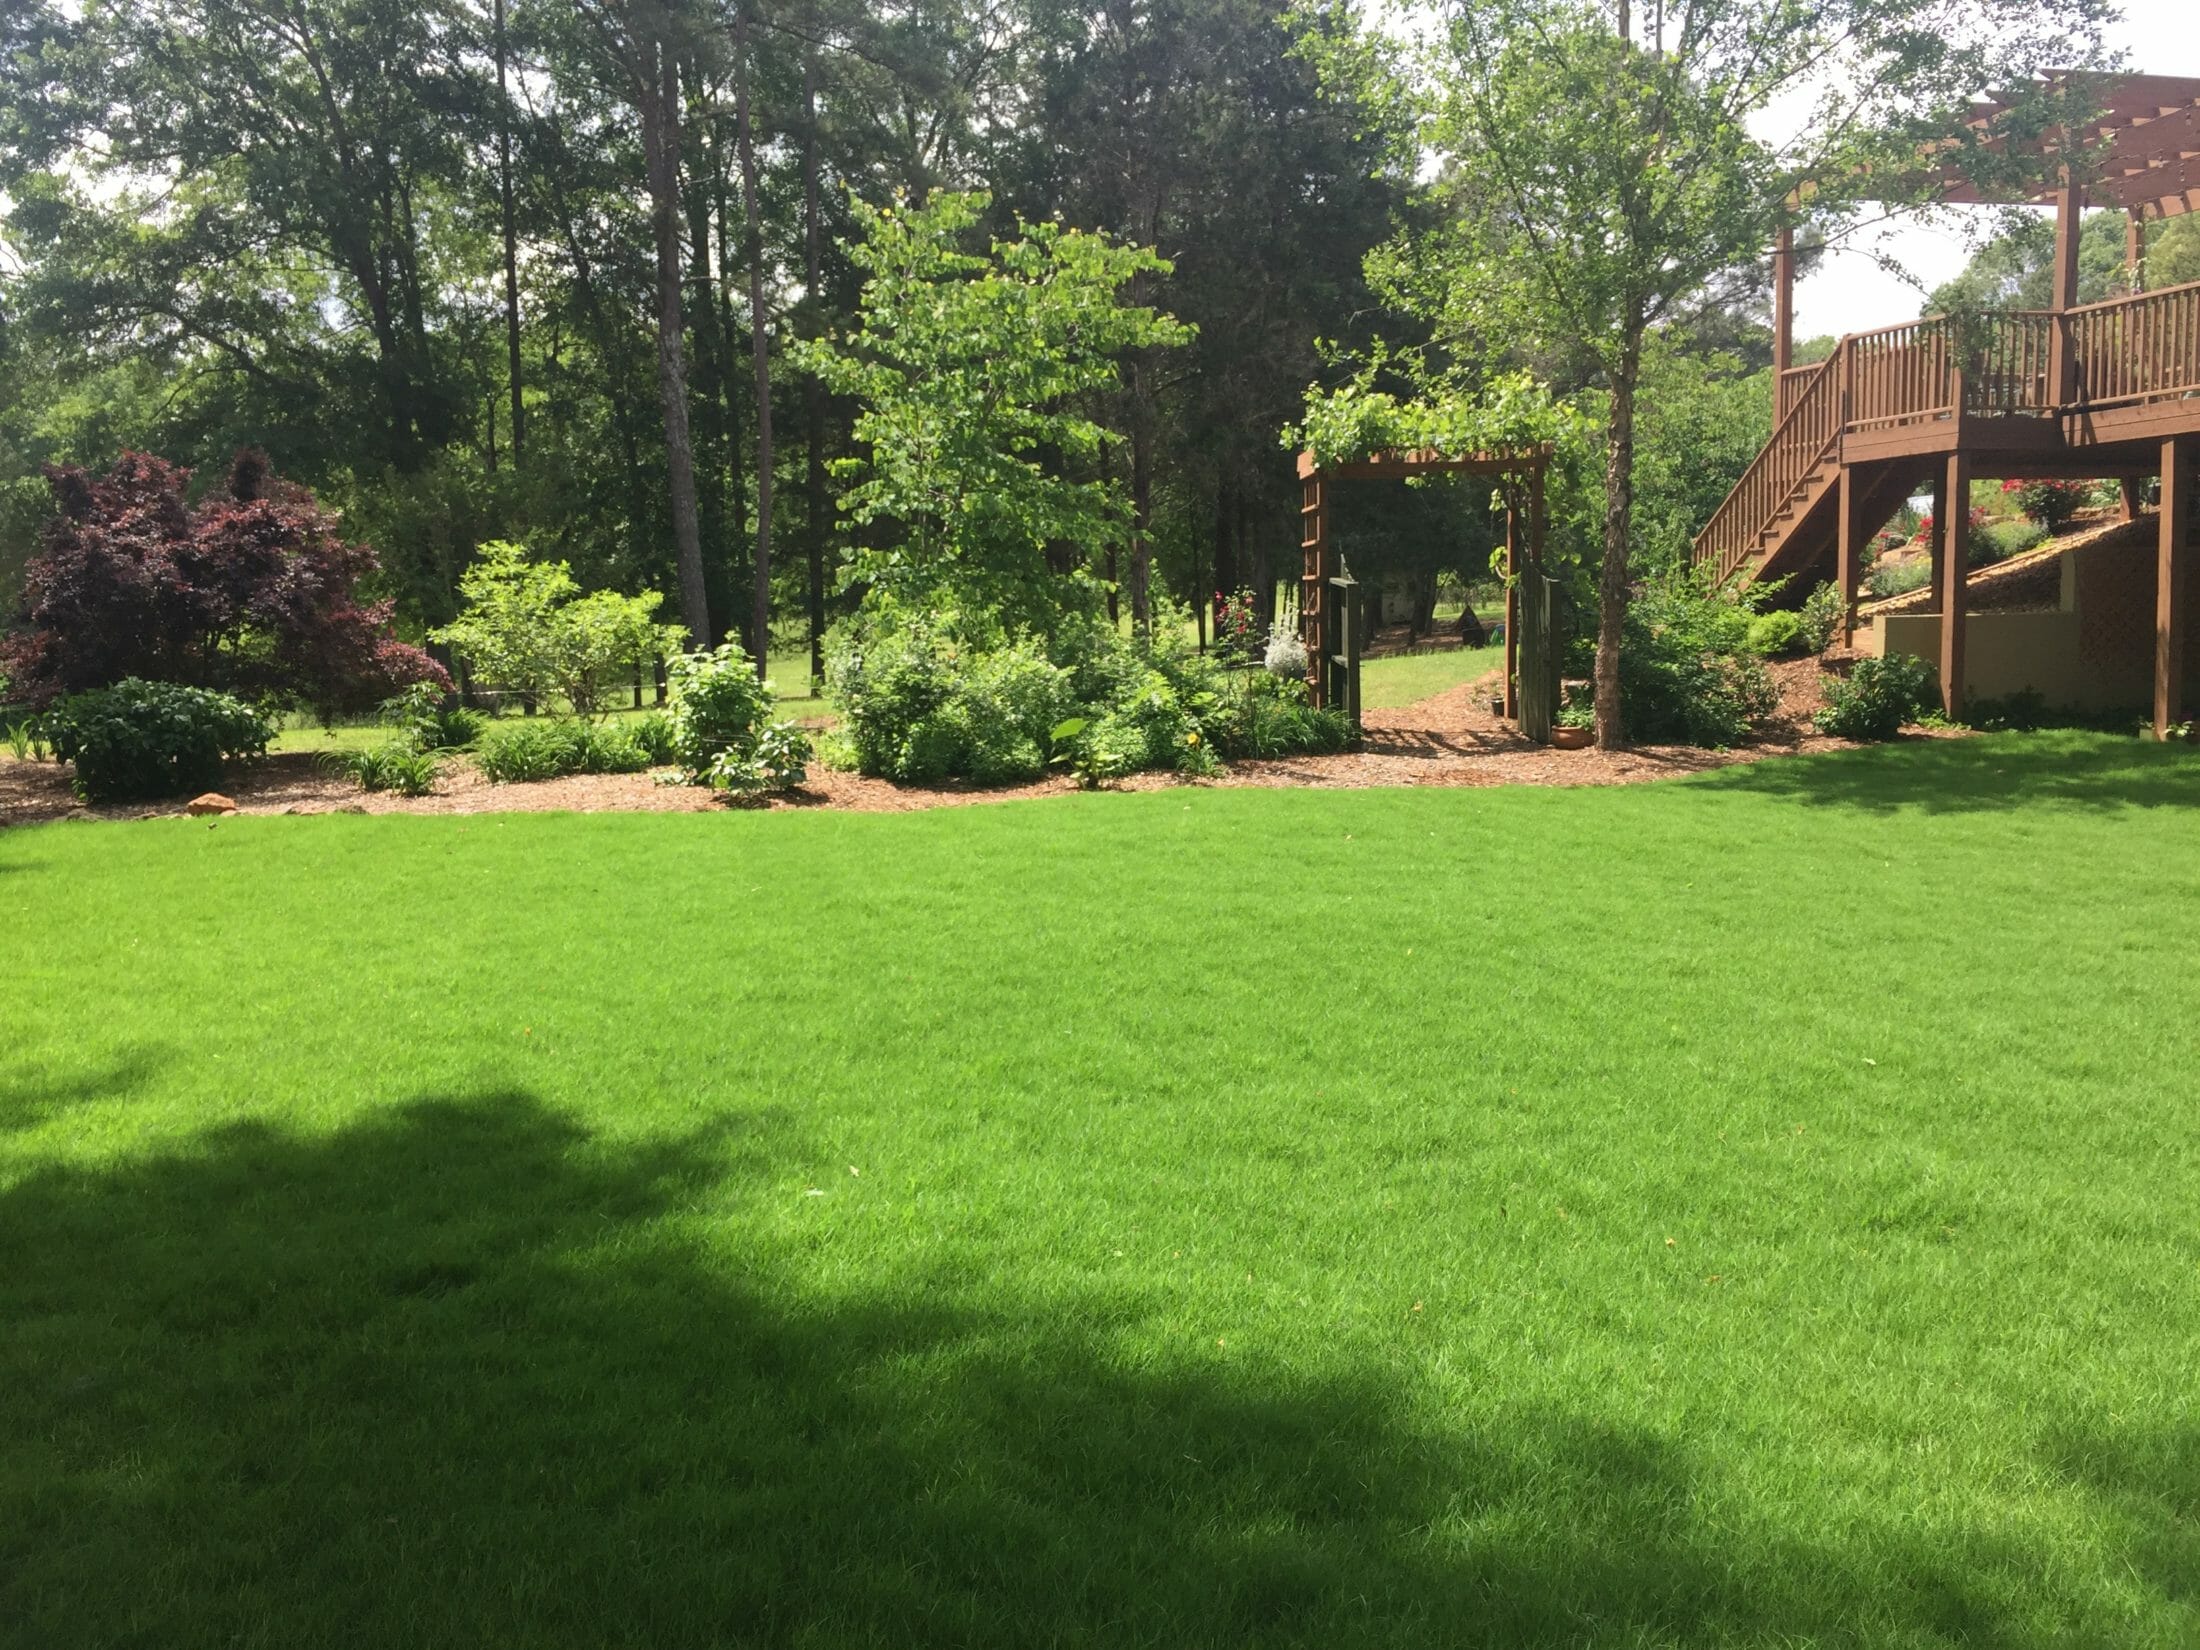 How to Prepare a New Lawn